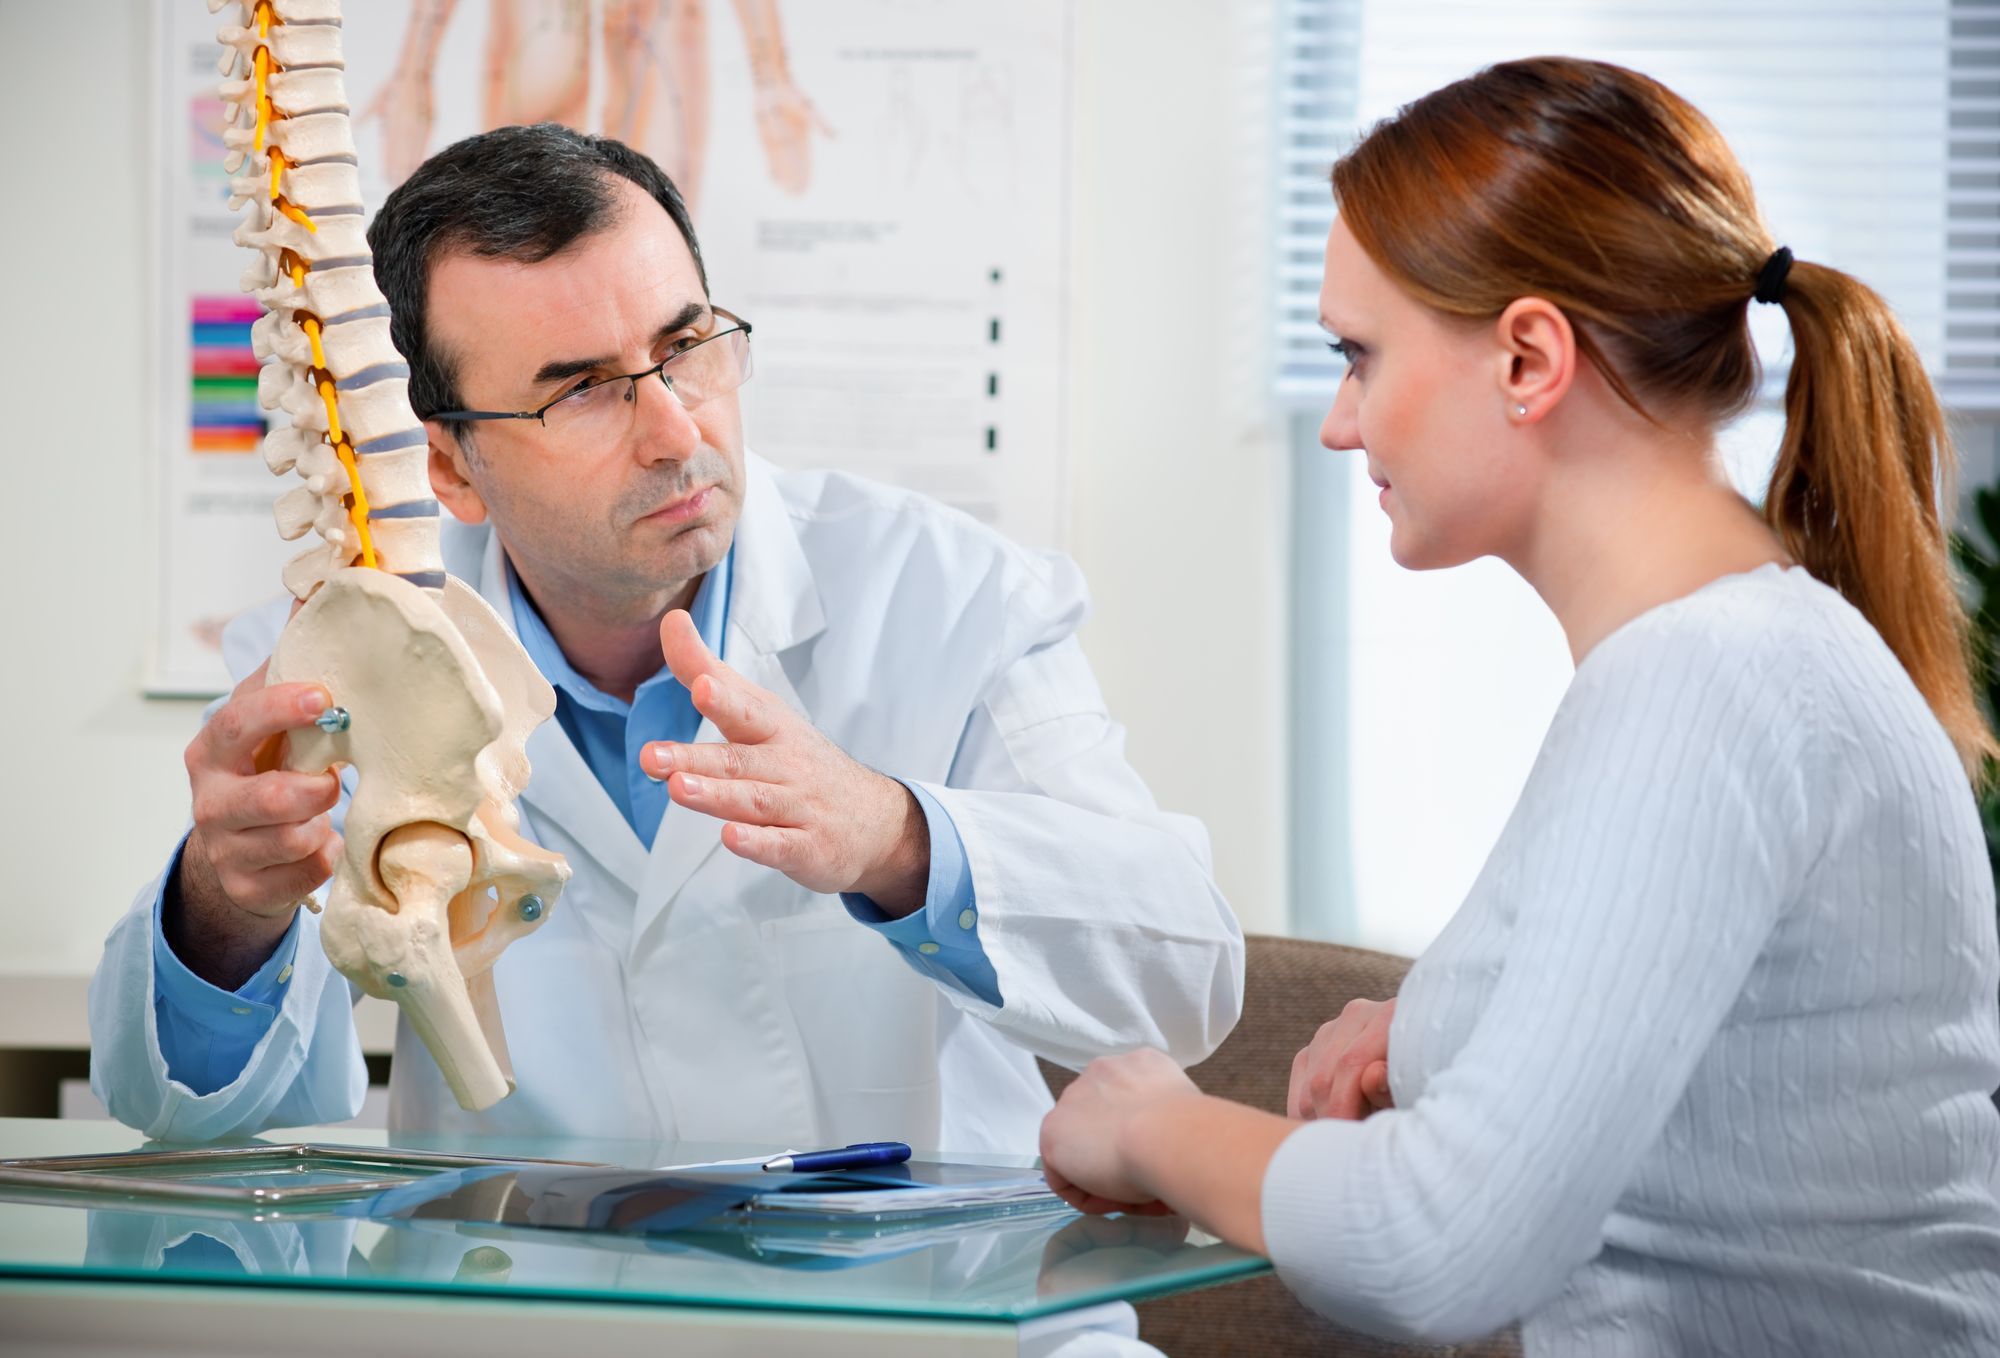 A Chiropractor shows the problem areas on the model of the spine to the patient and explains the cause of her pain.